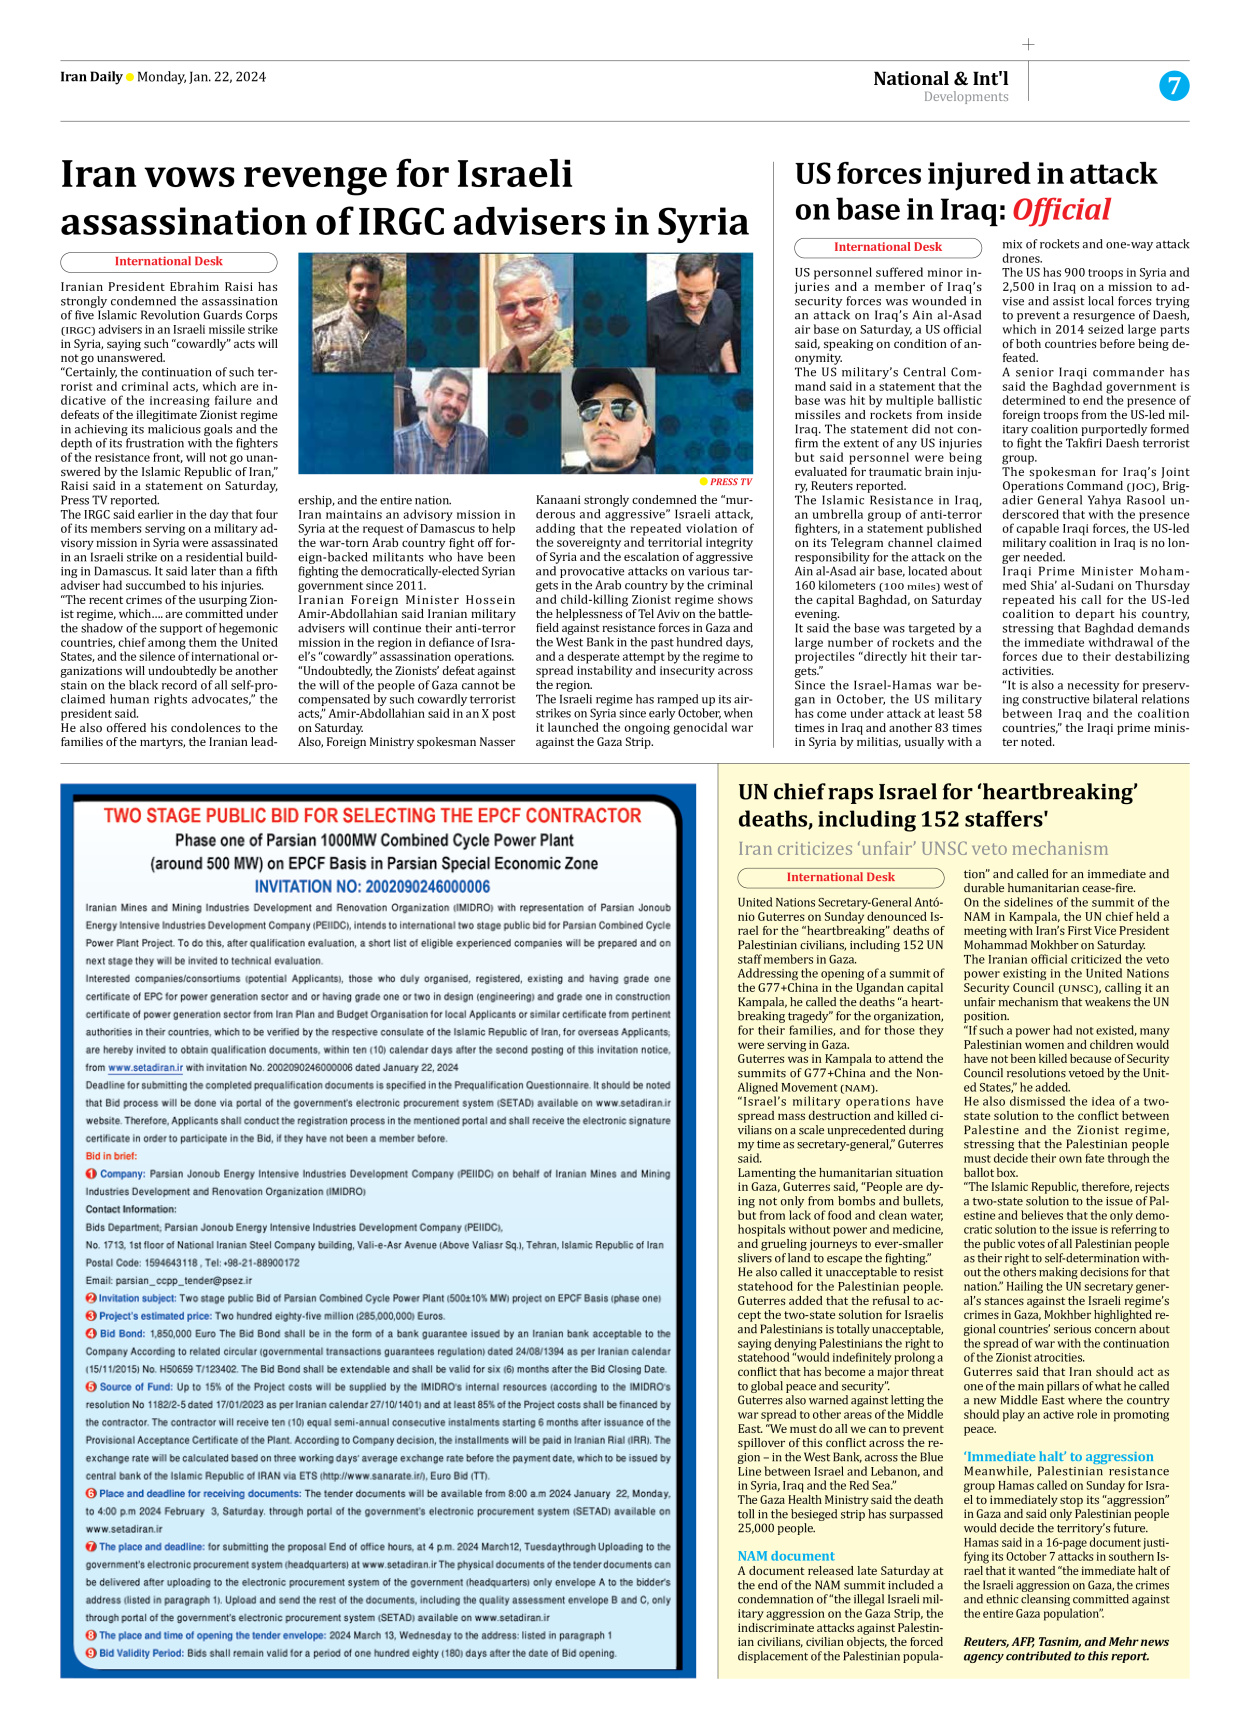 Iran Daily - Number Seven Thousand Four Hundred and Ninety One - 22 January 2024 - Page 7